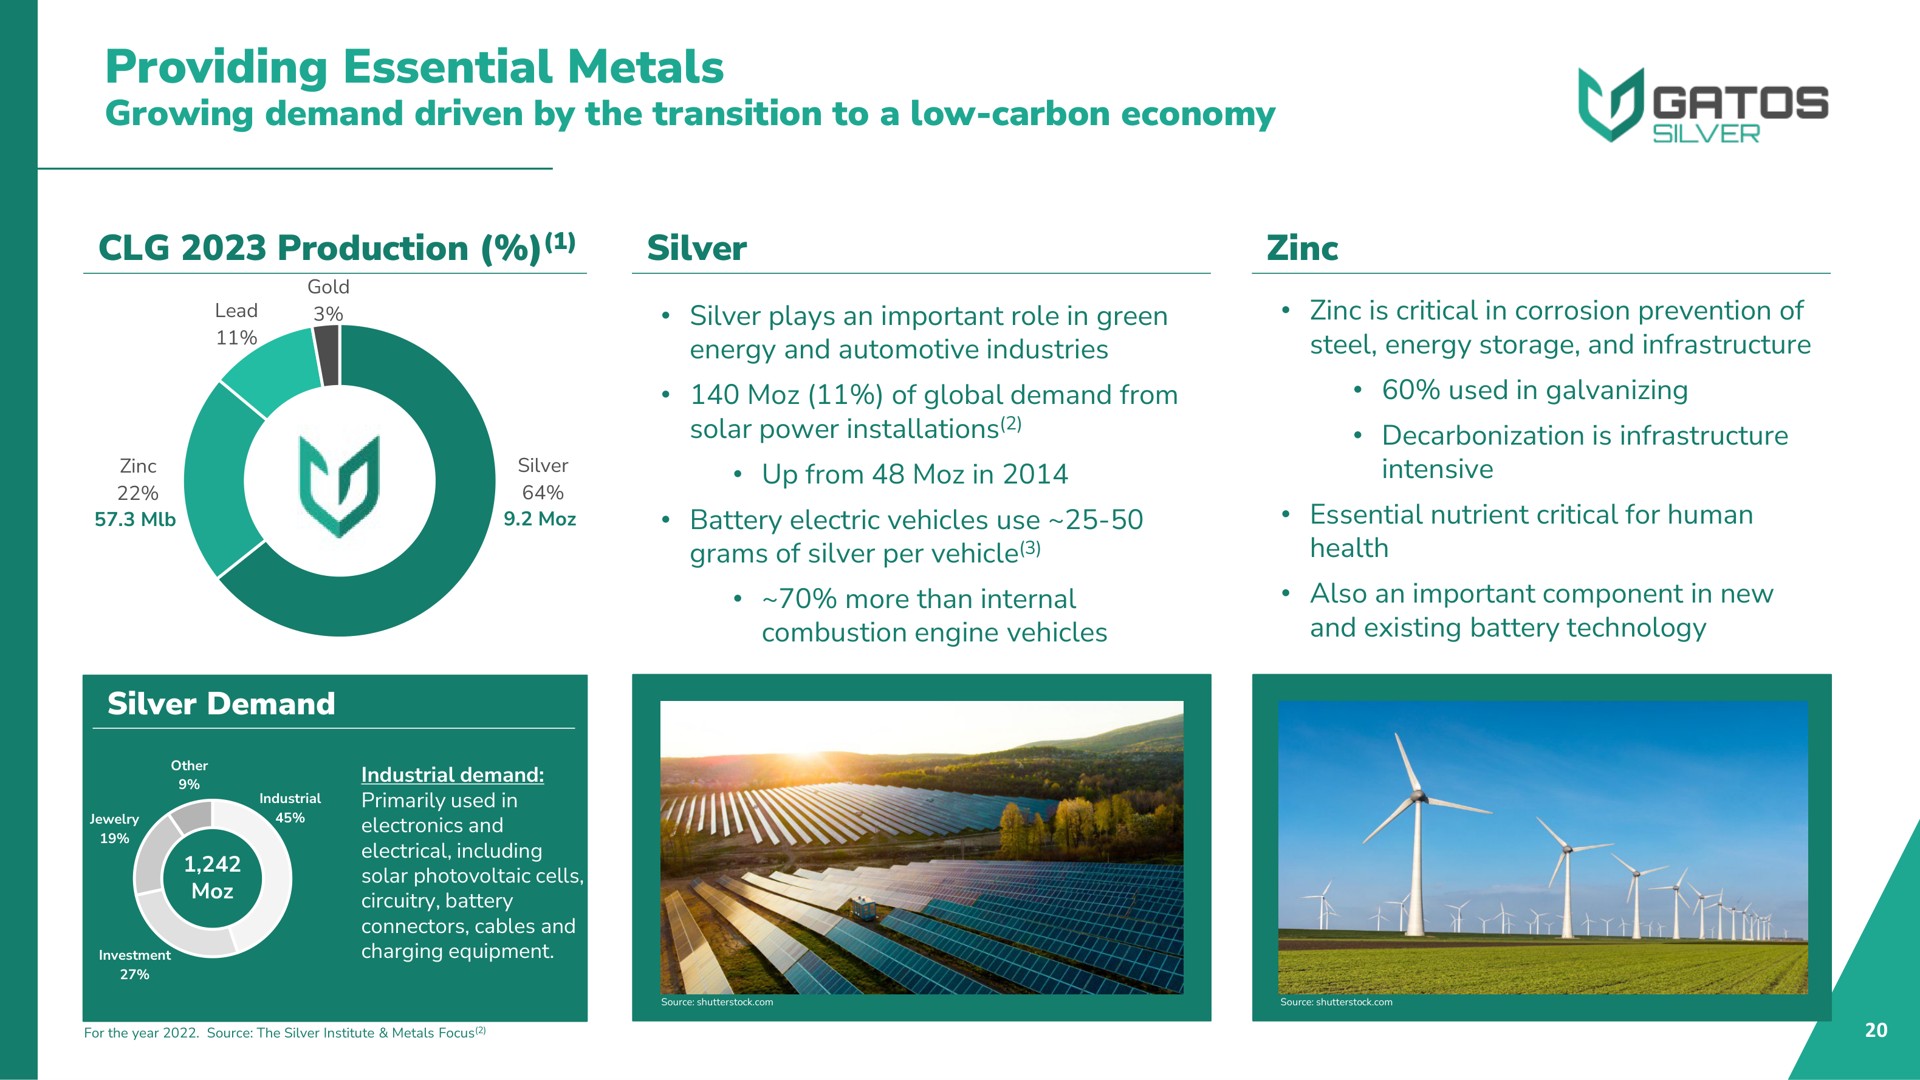 providing essential metals growing demand driven by the transition to a low carbon economy production silver zinc energy and automotive industries up from in steel energy storage and infrastructure intensive | Gatos Silver